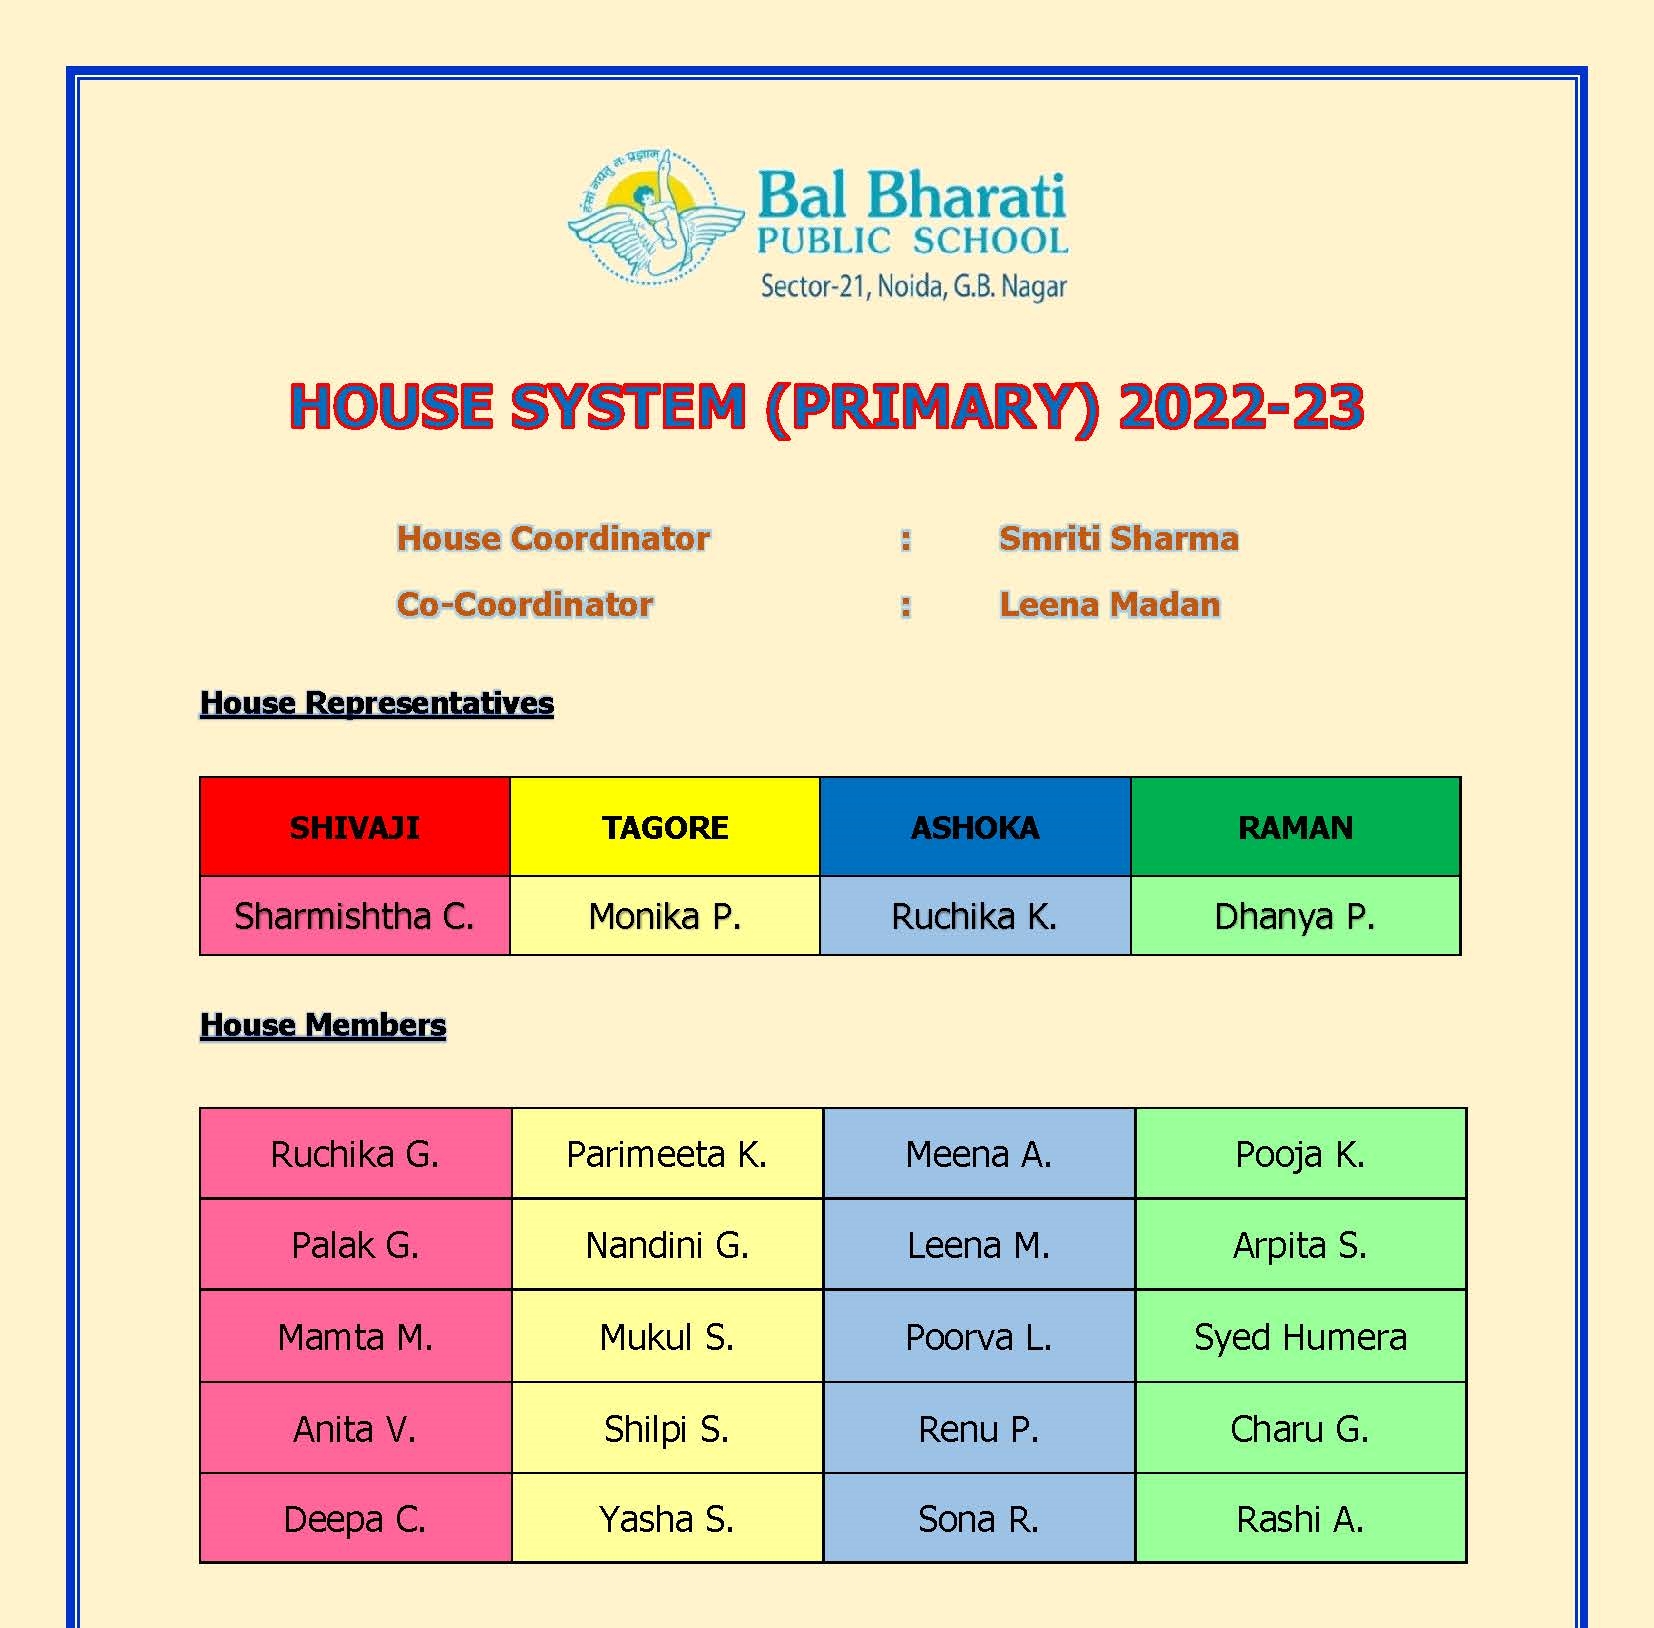 House system - Primary 2022-23